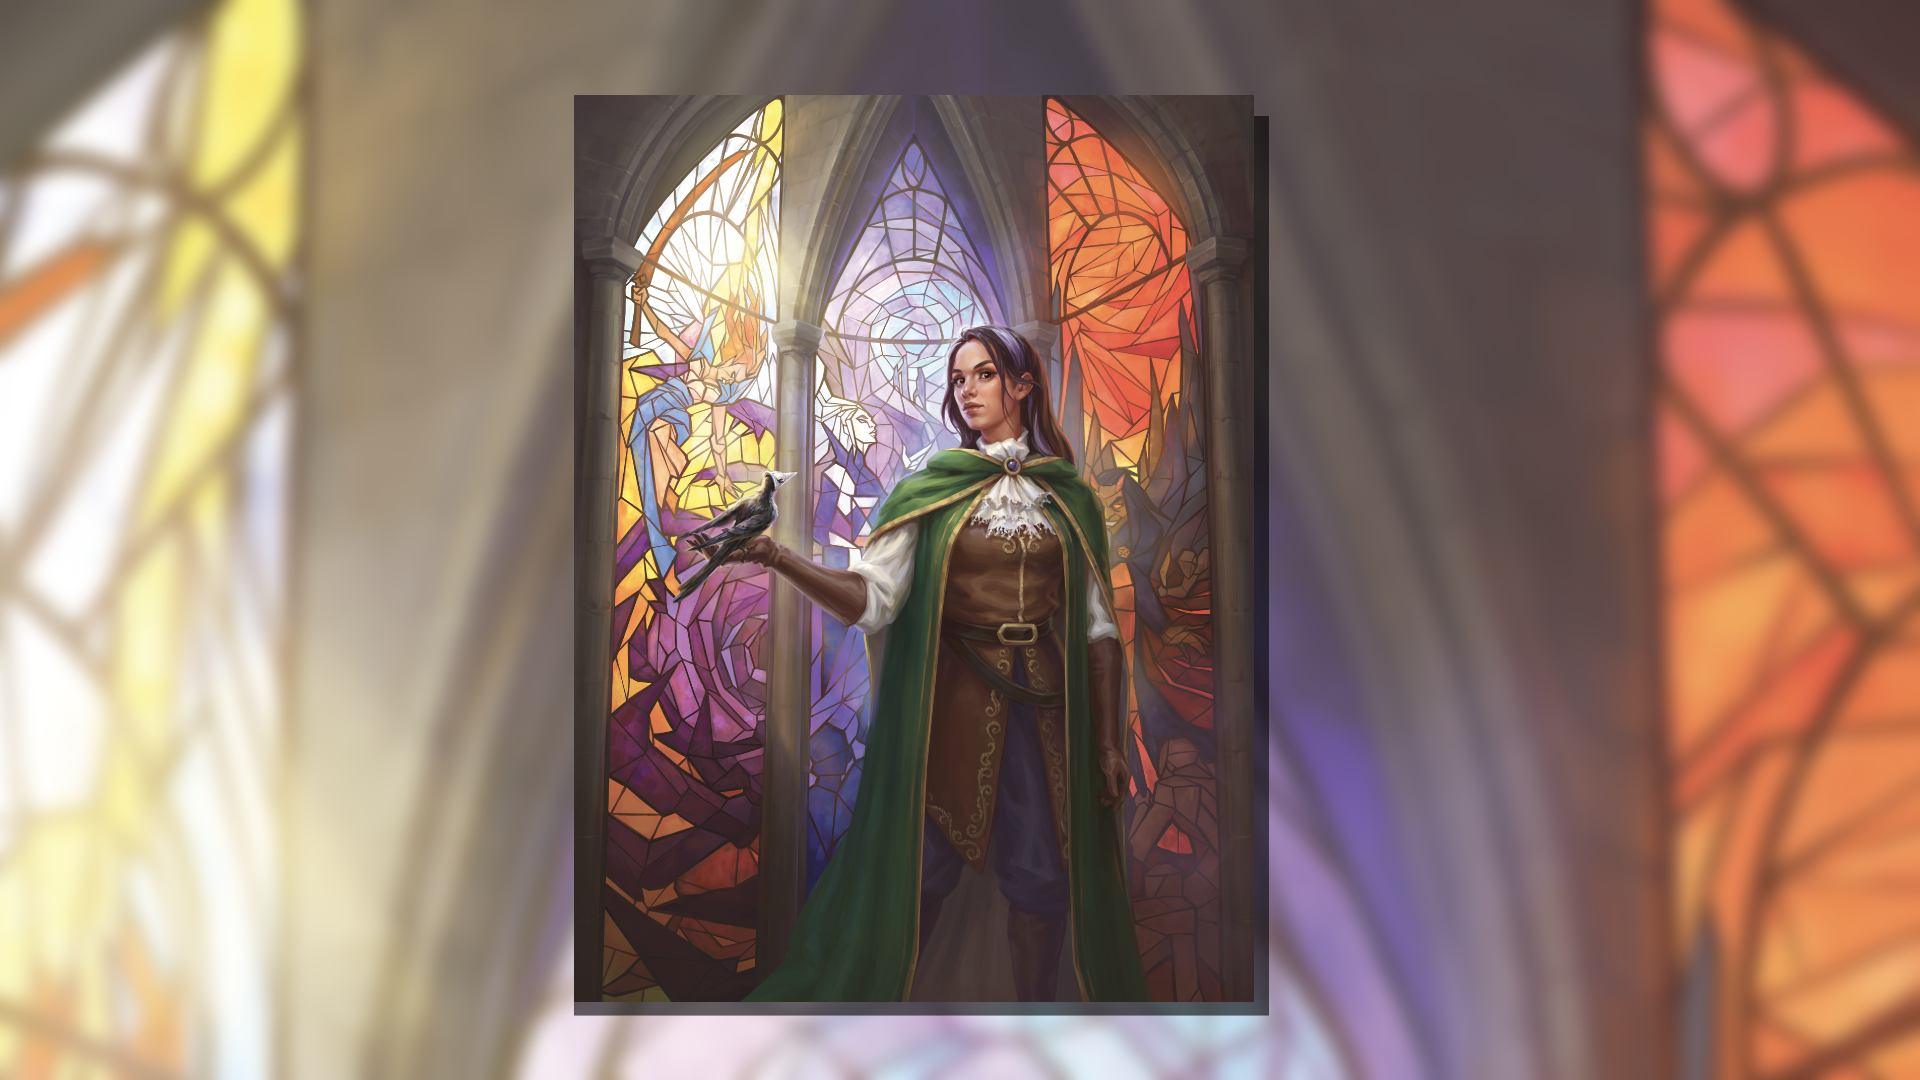 Arazni standing in front of a stained-glass window, holding Yivali, a nosoi psychopomp of Pharasma.